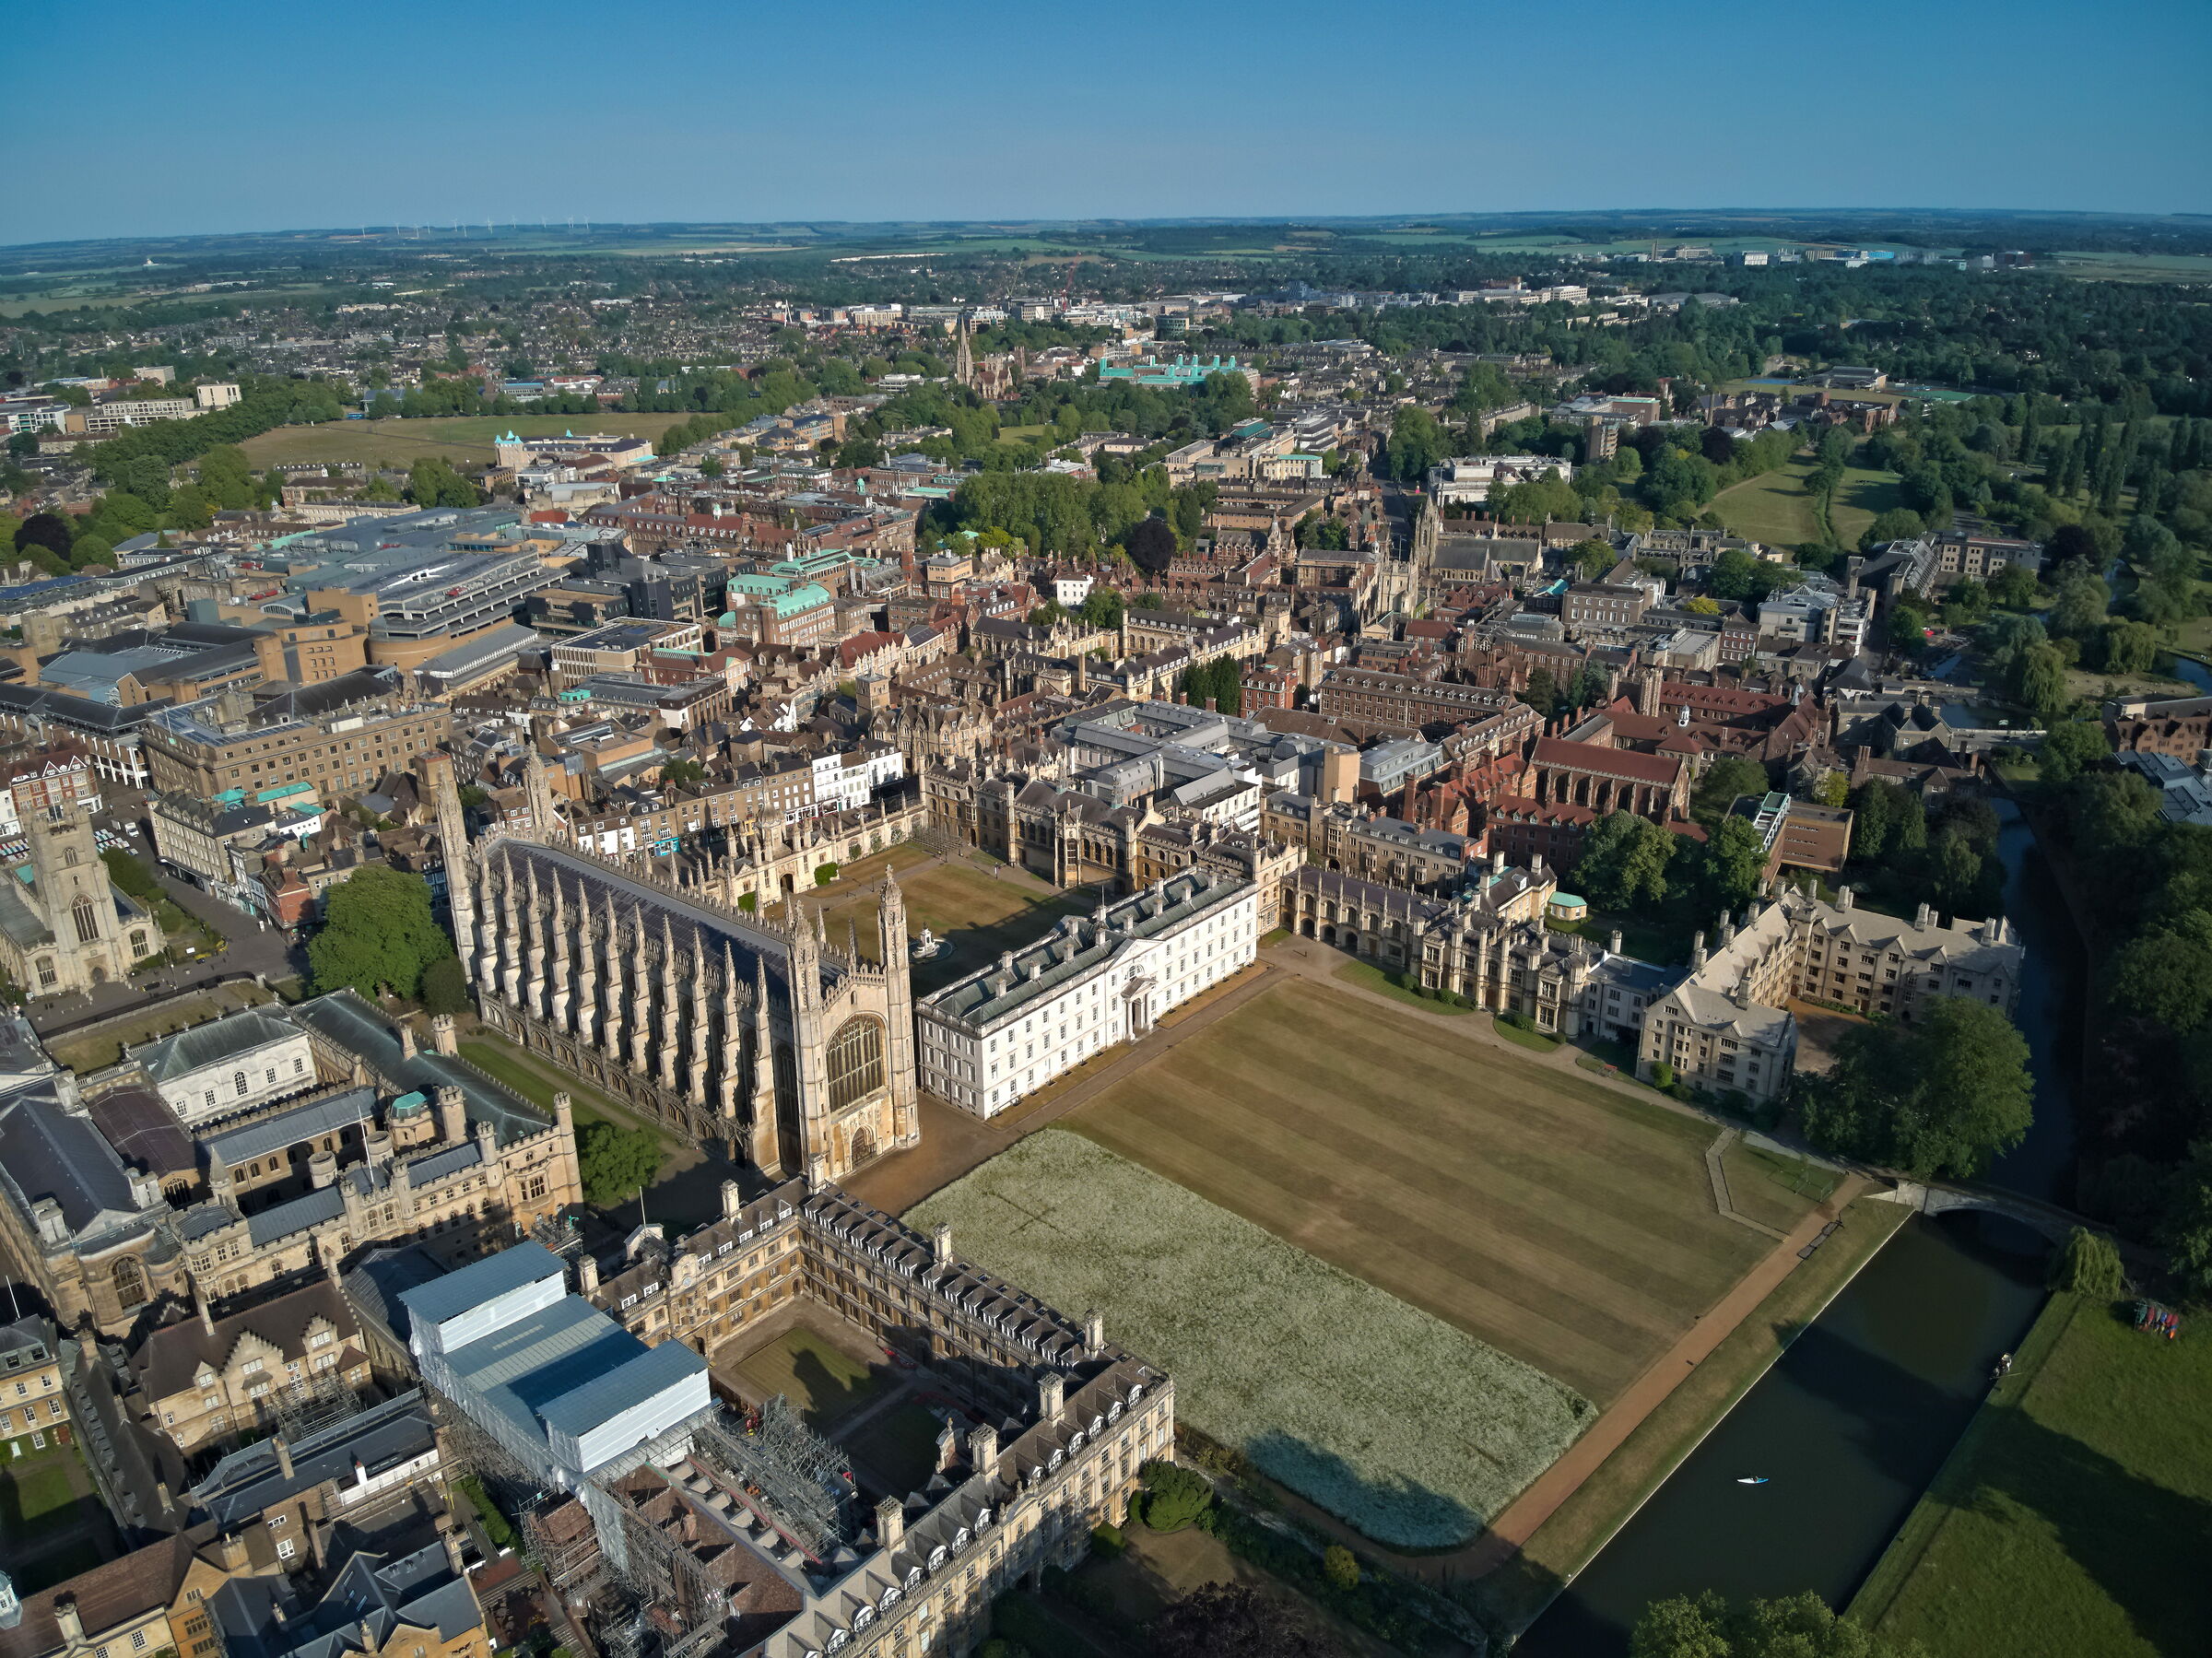 King's college...